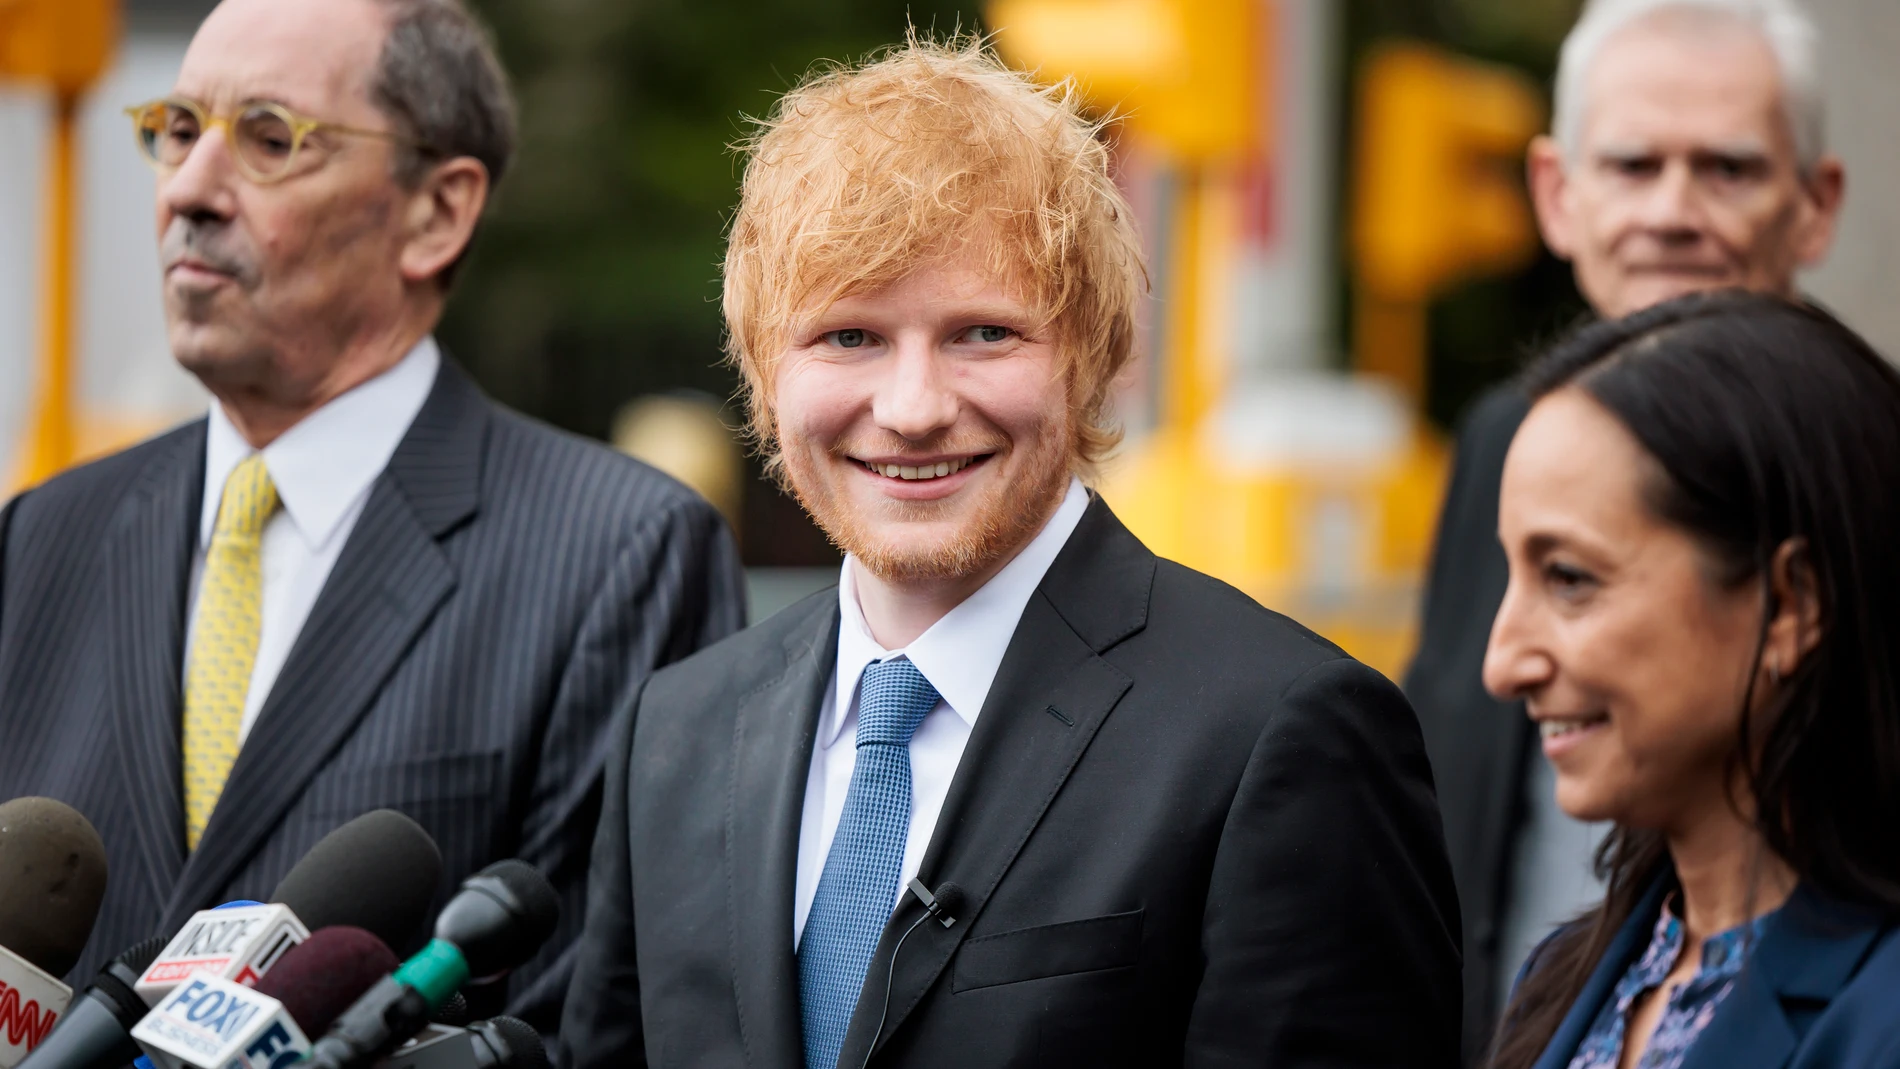 New York (United States), 04/05/2023.- Musician Ed Sheeran (C) smiles while standing with his legal team after winning his copyright infringement case in New York, New York, USA, 04 May 2023. Sheeran had been accused of copying portions of the Marvin Gaye song 'Let'Äôs Get it On', which was co-written by Ed Townsend, in his song 'Thinking Out Loud'. (Estados Unidos, Nueva York) EFE/EPA/JUSTIN LANE